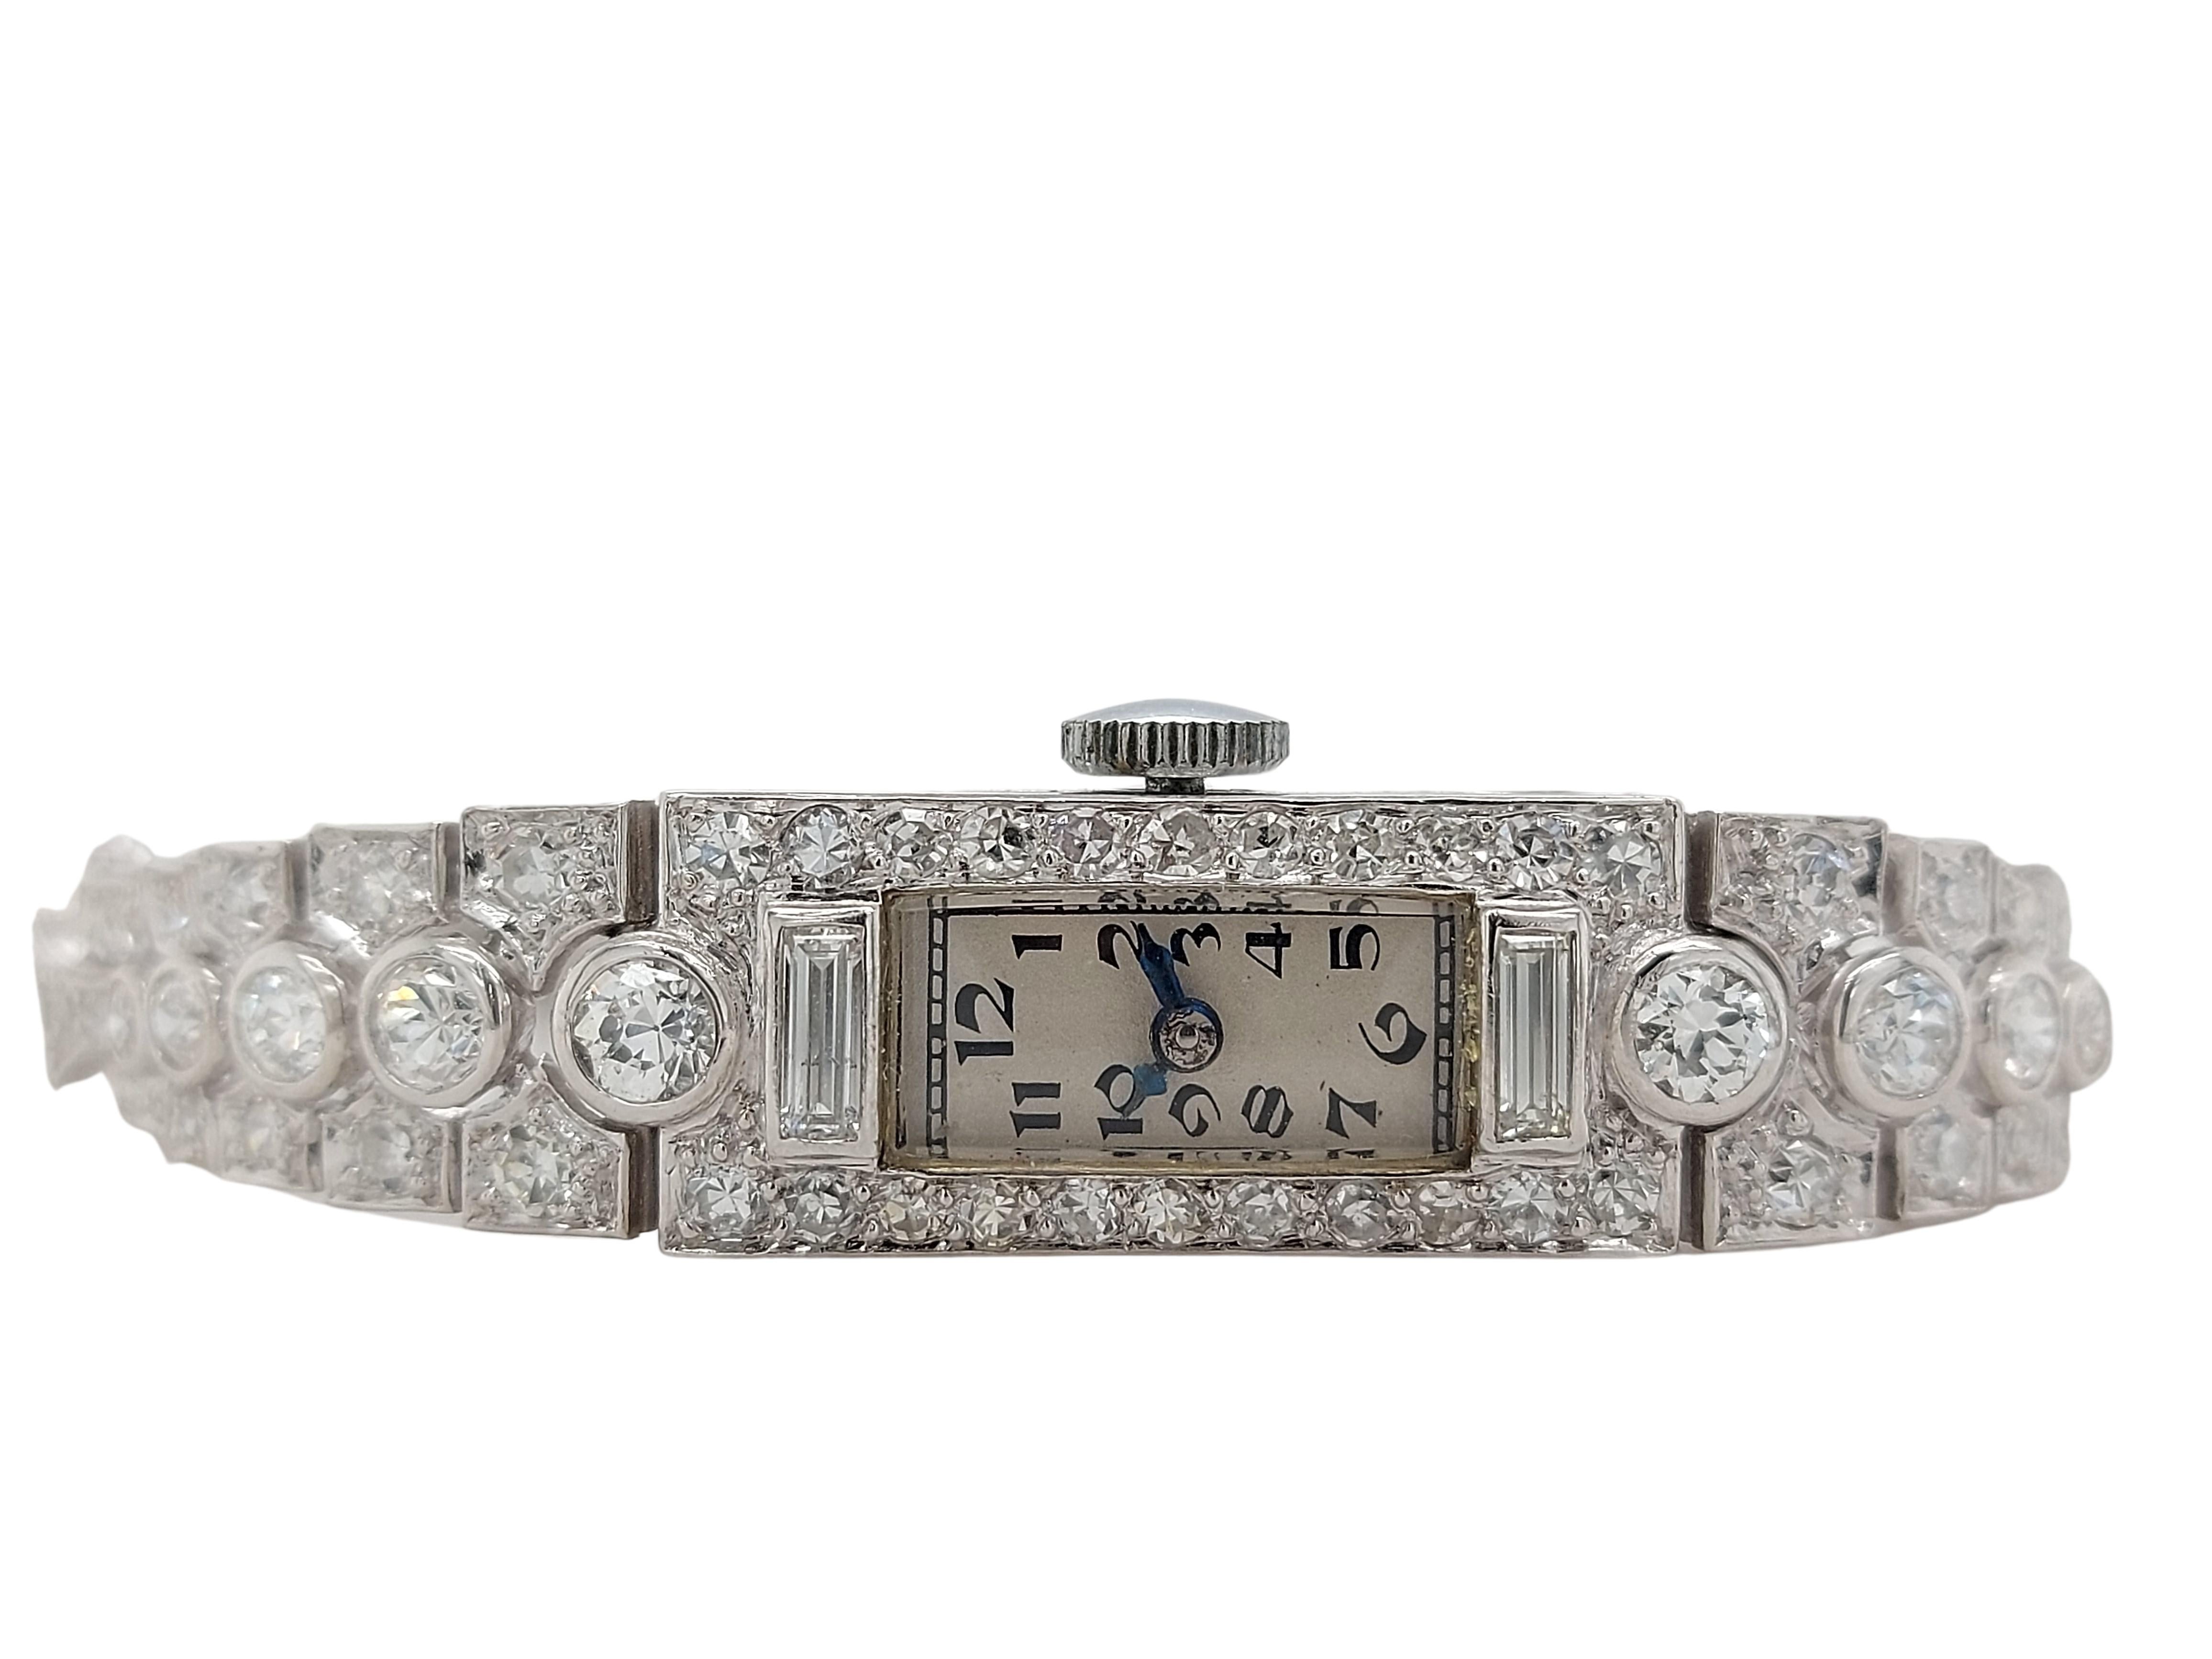 Platinum Lady Wristwatch With Old Cut / Baguette Cut Diamonds

Movement: mechanical hand winding

Functions: Hours, Minutes

Case: Platinum, mineral glass, 21 x 9 mm, set with old cut and baguette cut diamonds

Dial: white with arabic